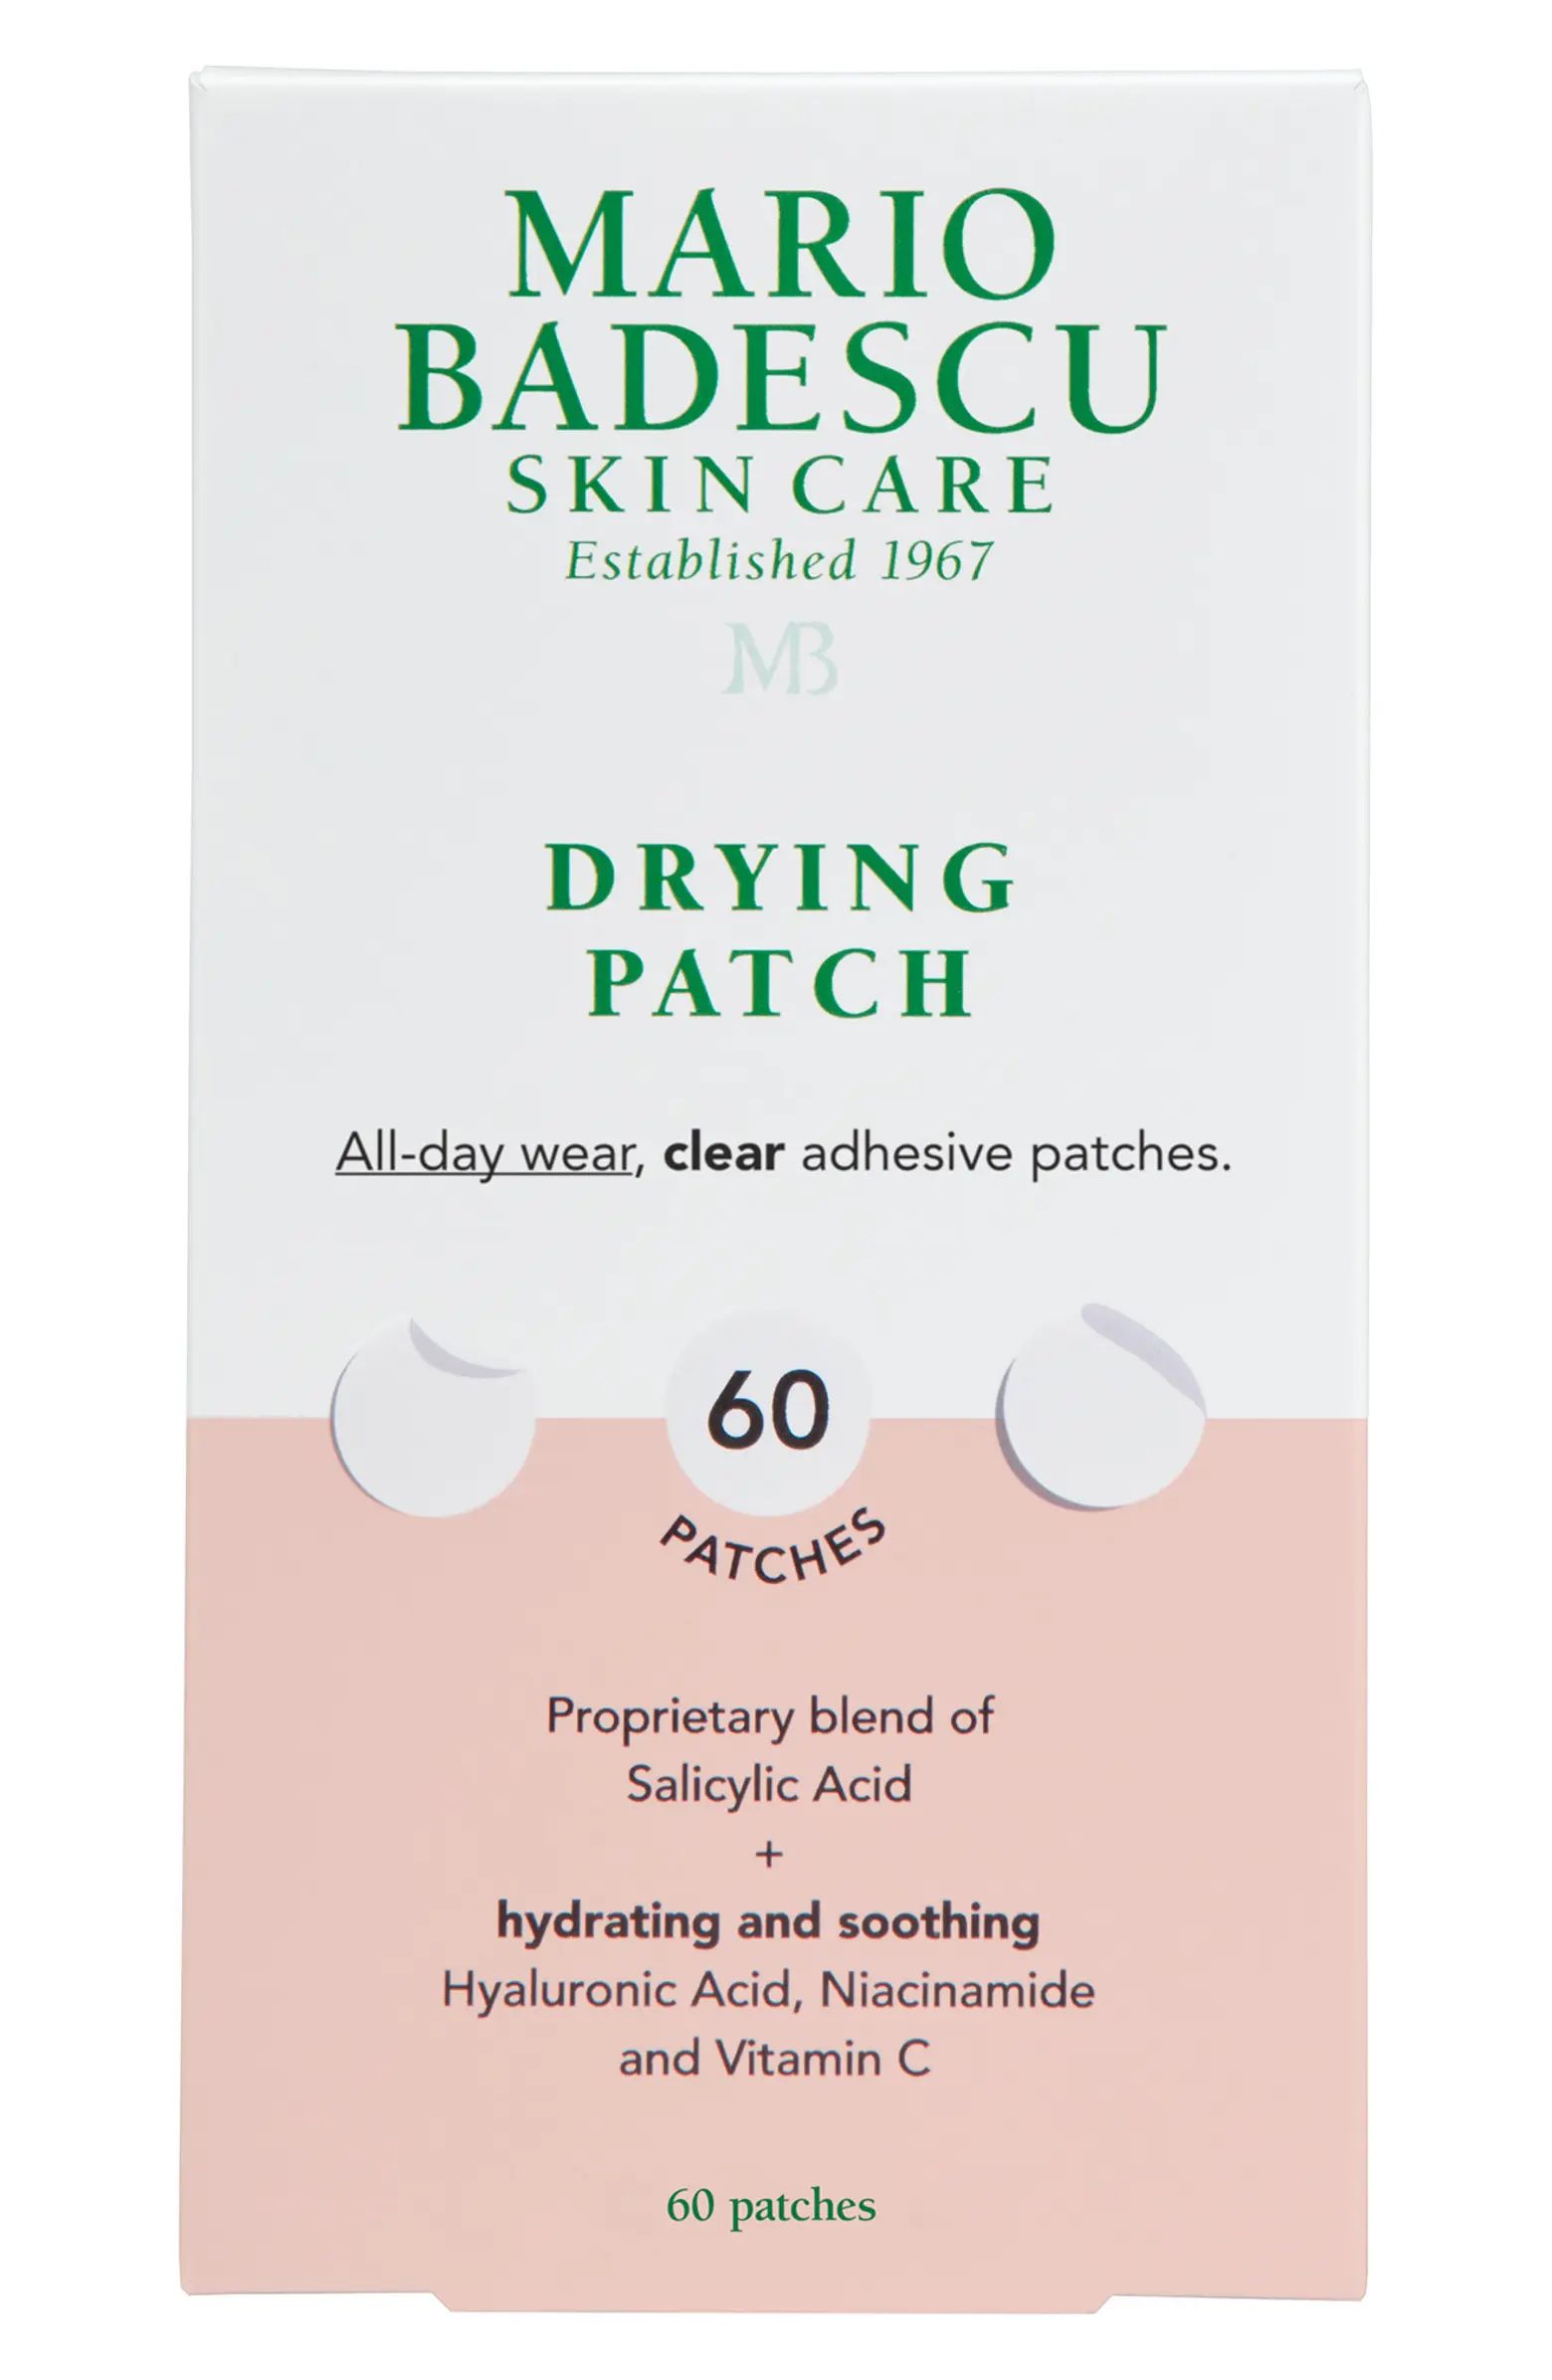 Mario Badescu Drying Patches | Nordstrom | Nordstrom